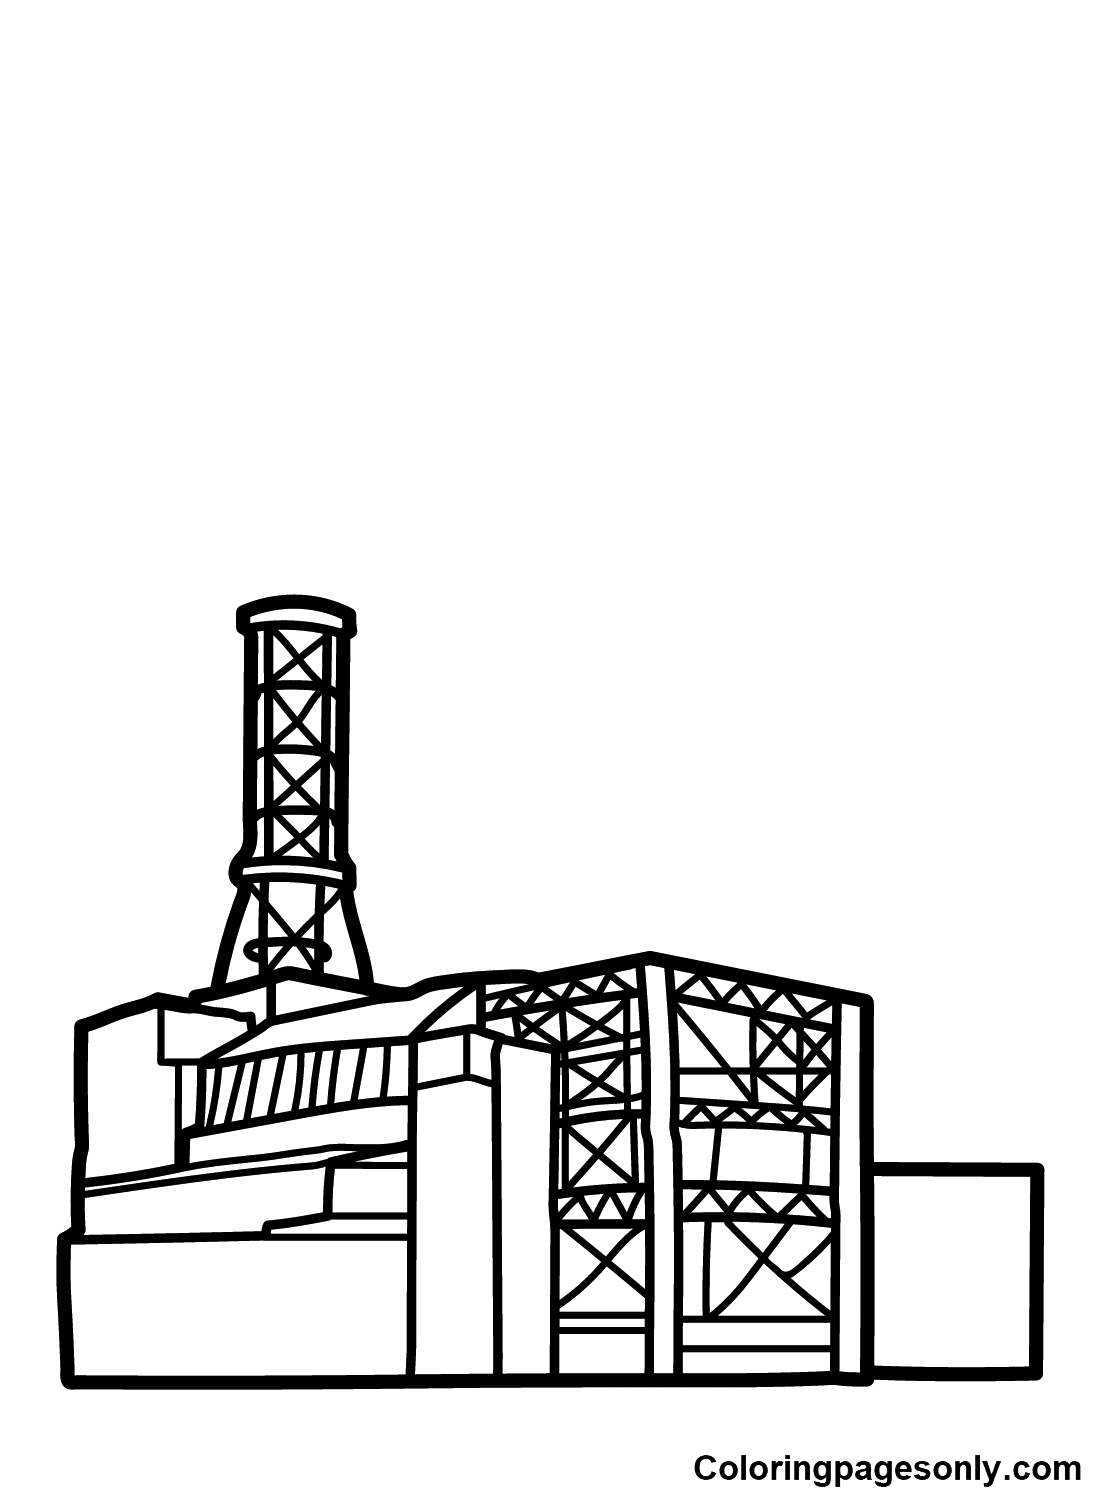 Factory Printable Coloring Page